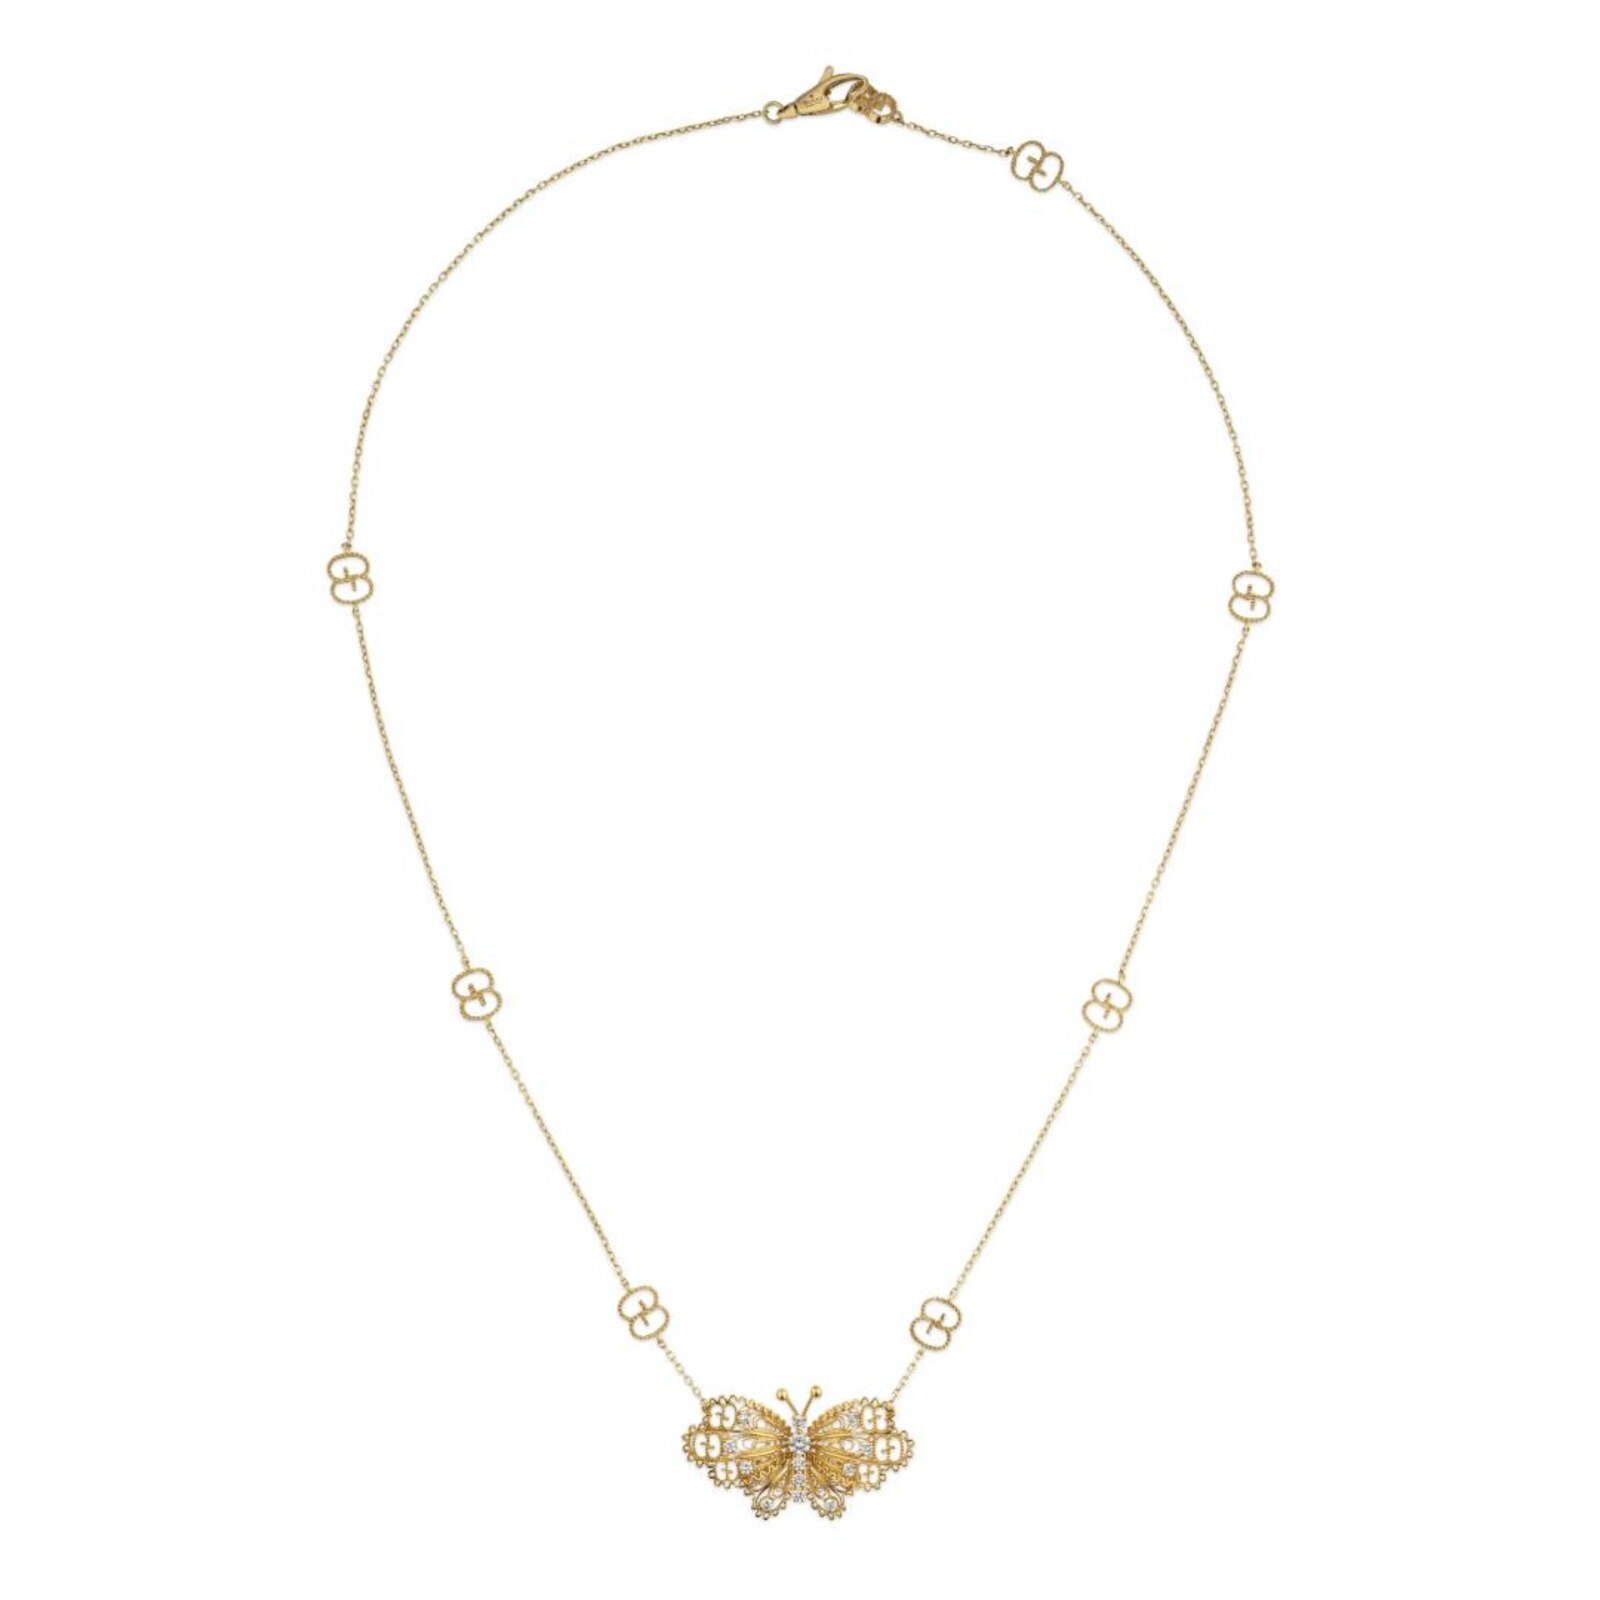 Gucci - Trademark Heart and Butterfly Silver Necklace | www.luxurybags.eu